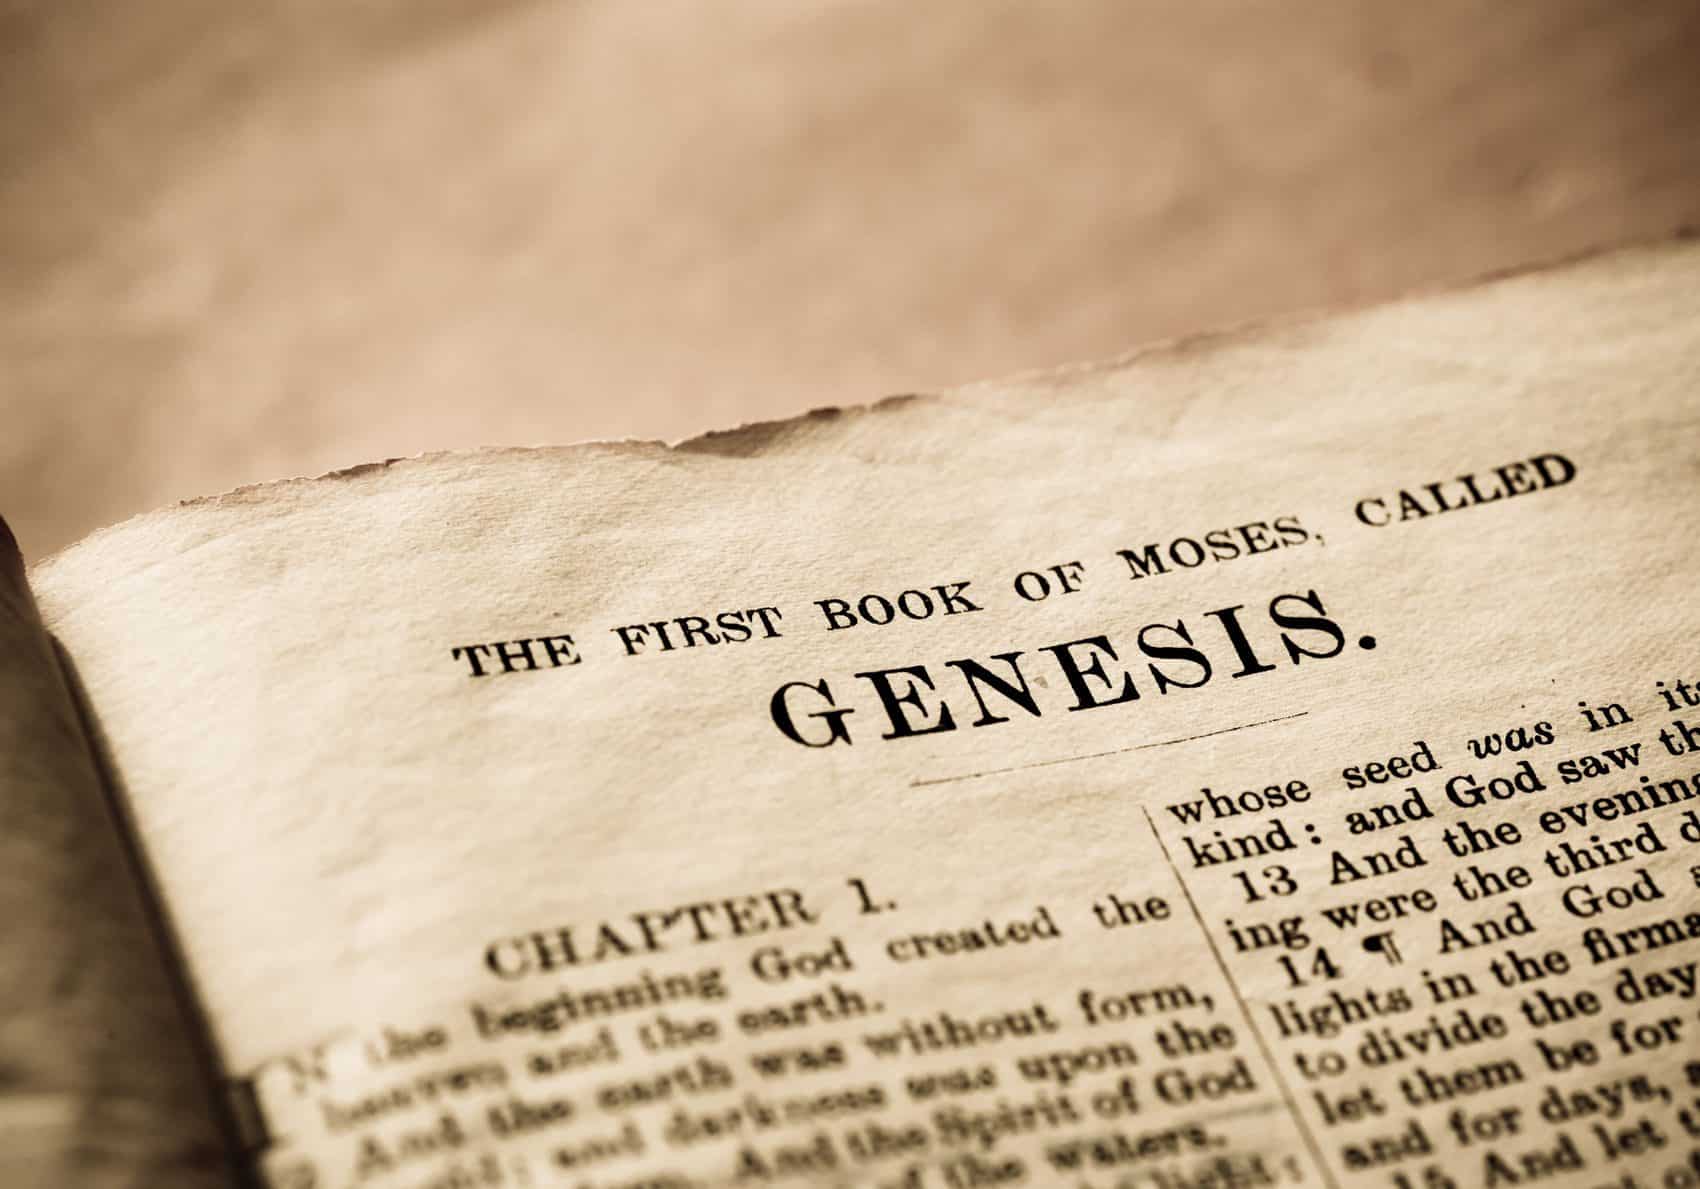 Historical Facts that ruined our perspectives - old testament - The First Book Of Moses, Called Genesis. whose seed was in its kind and God saw th Chapter 1. the beginning God created the have and the earth. 13 And the evening ing were the third d 14 And 